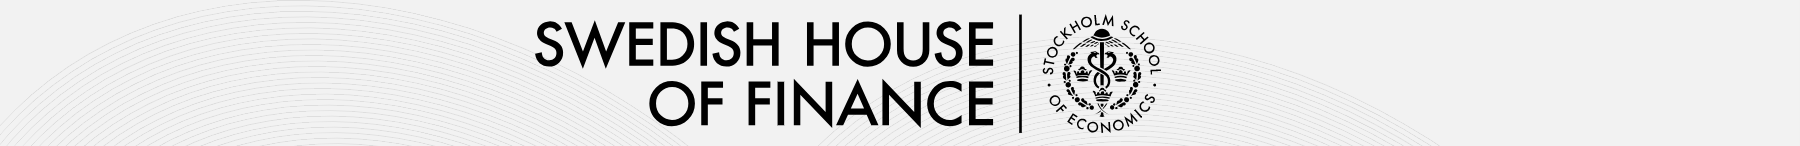 LOGO_house of finance_job search.png